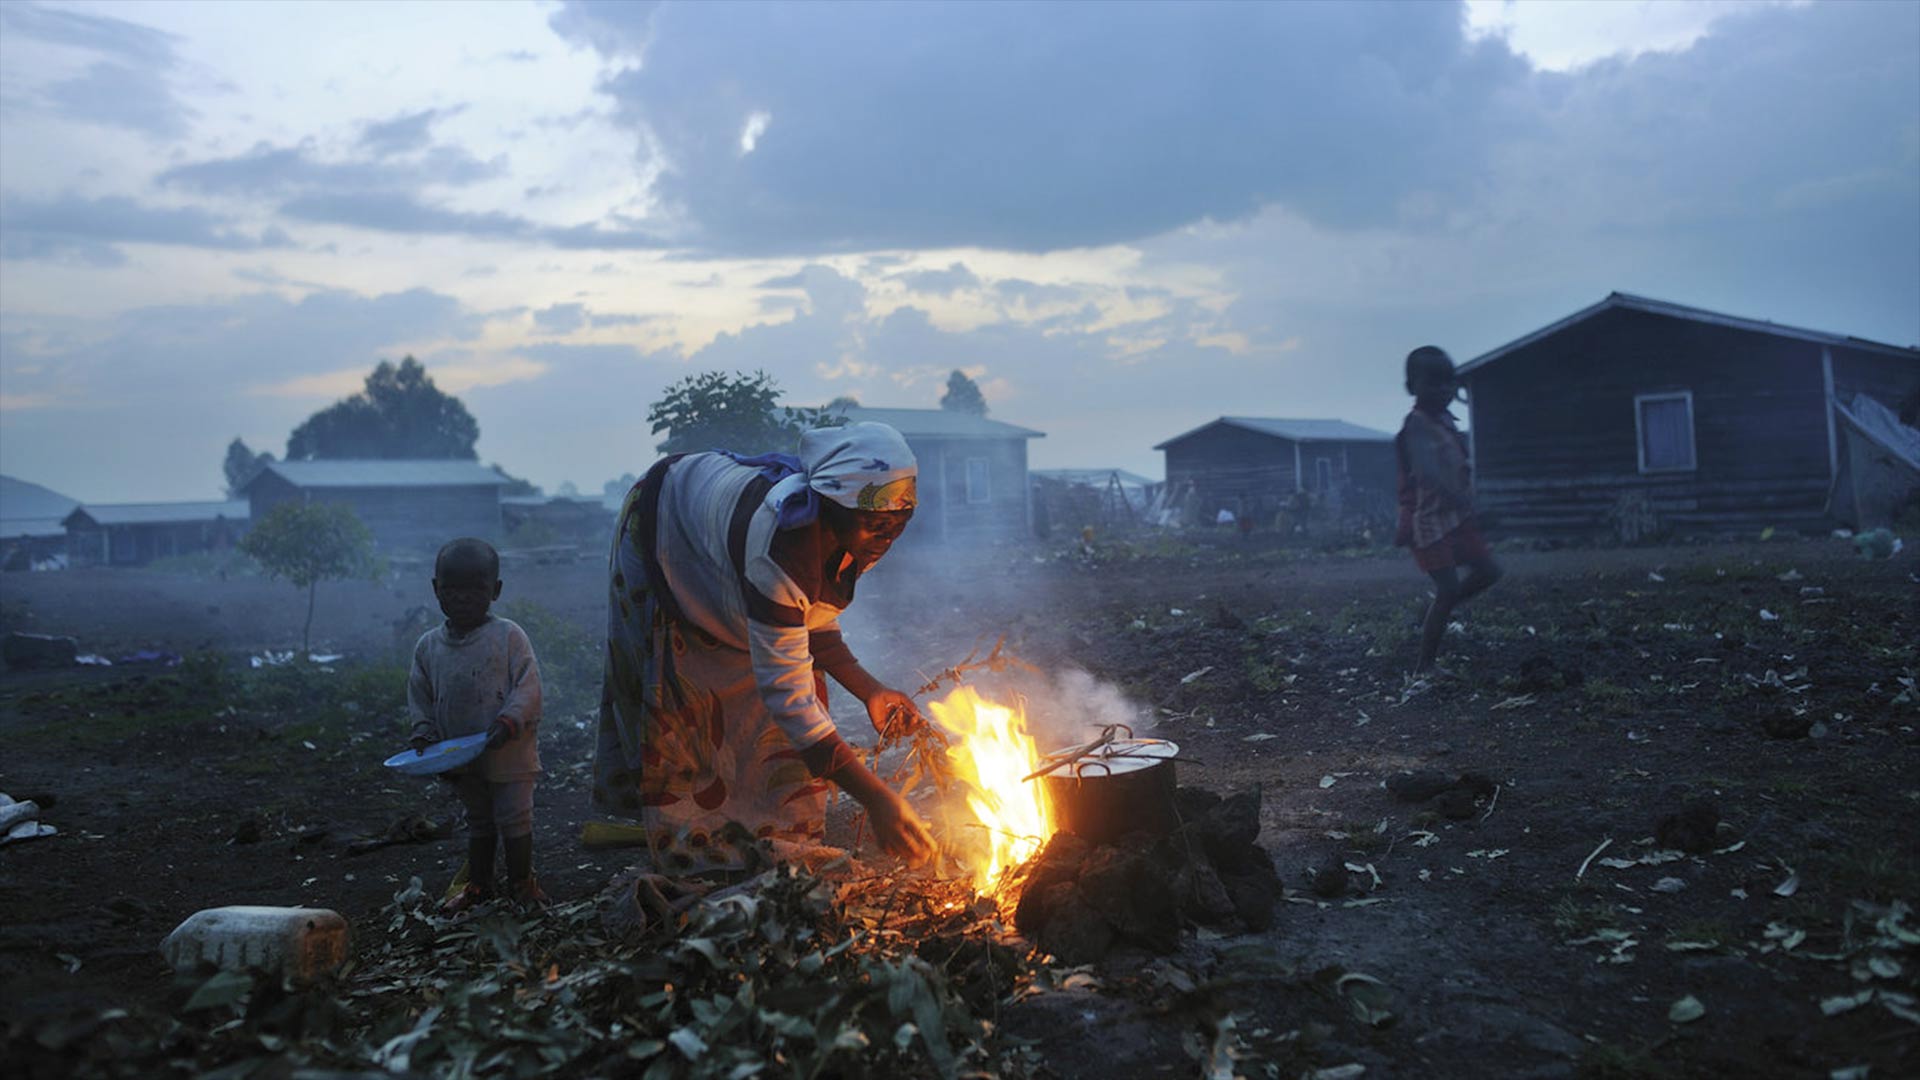 A Congolese woman displaced because of fighting cooks in the evening at Kibati camp in Goma, in eastern Congo. November 26, 2008
